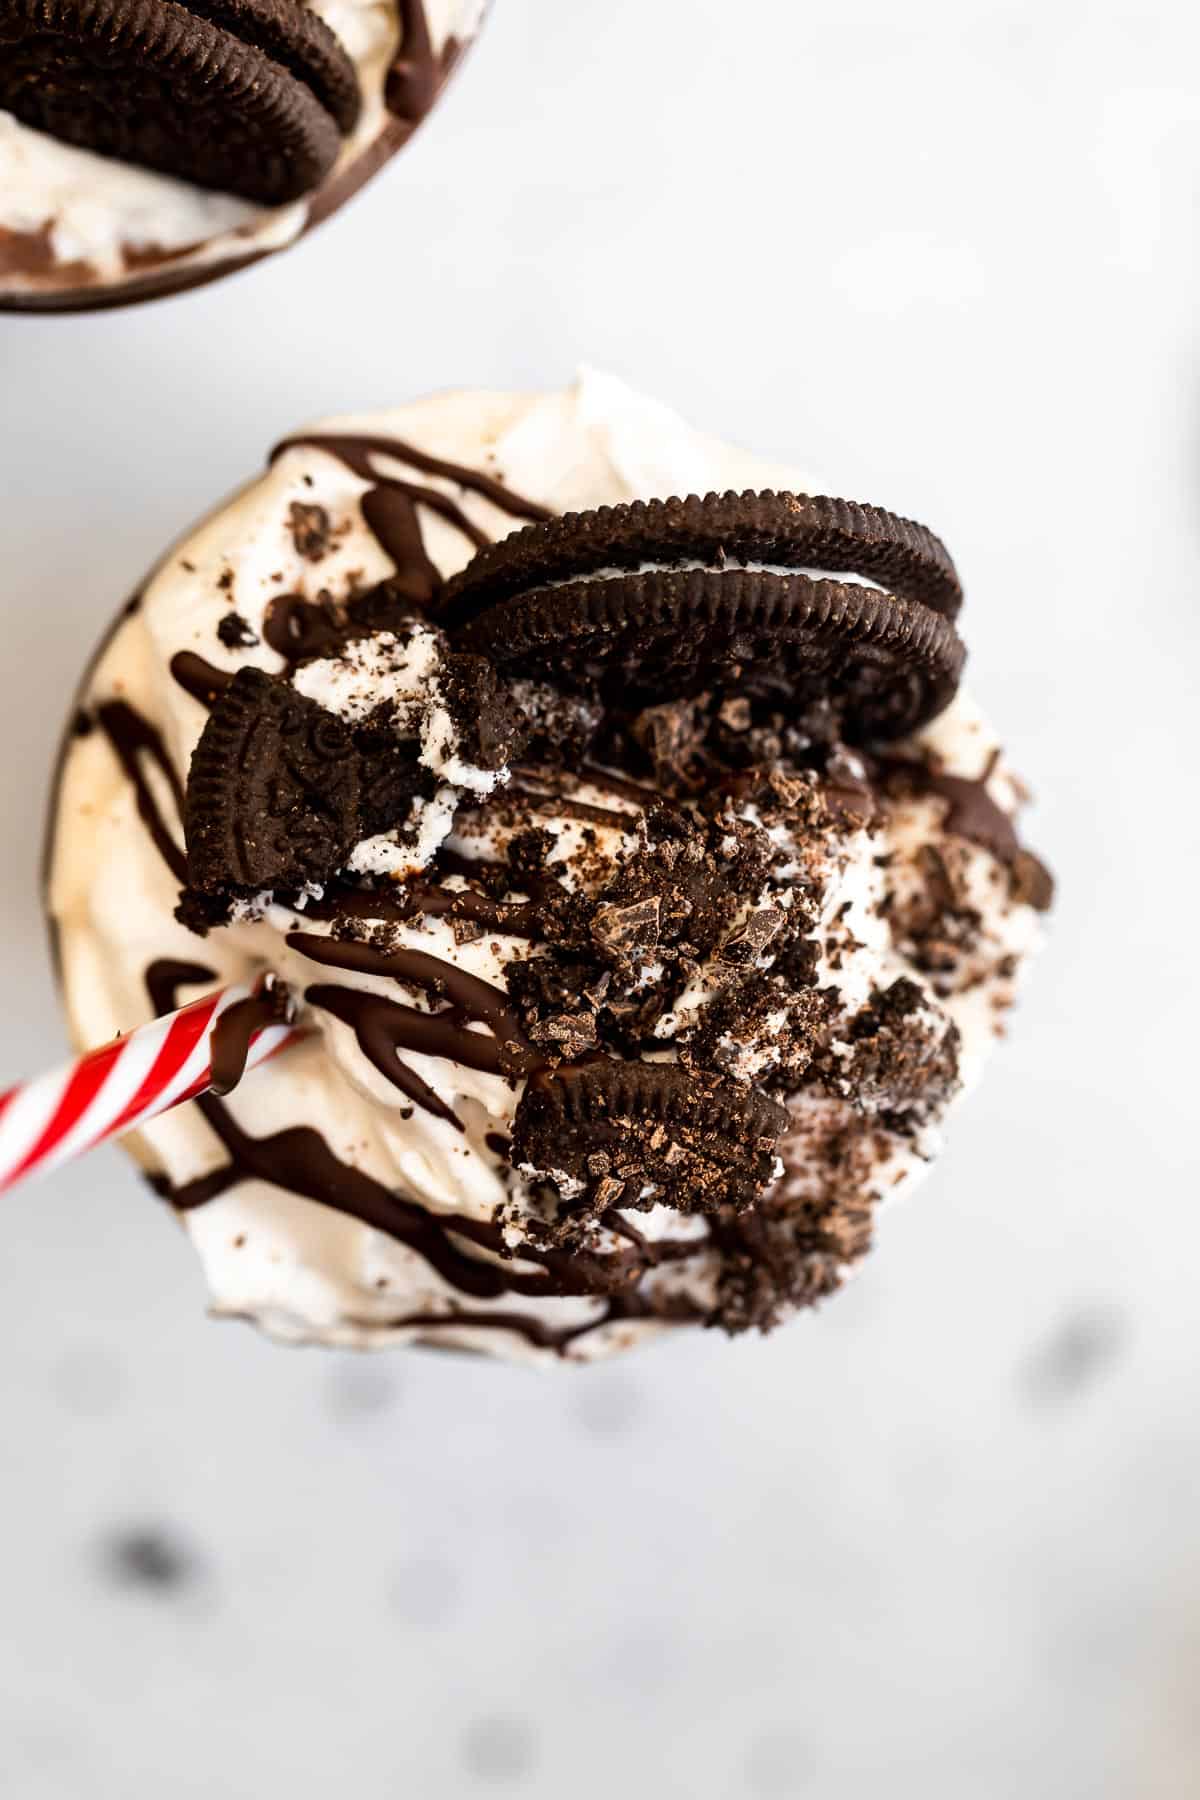 Overhead shot of the final milkshake with chocolate drizzled on top.